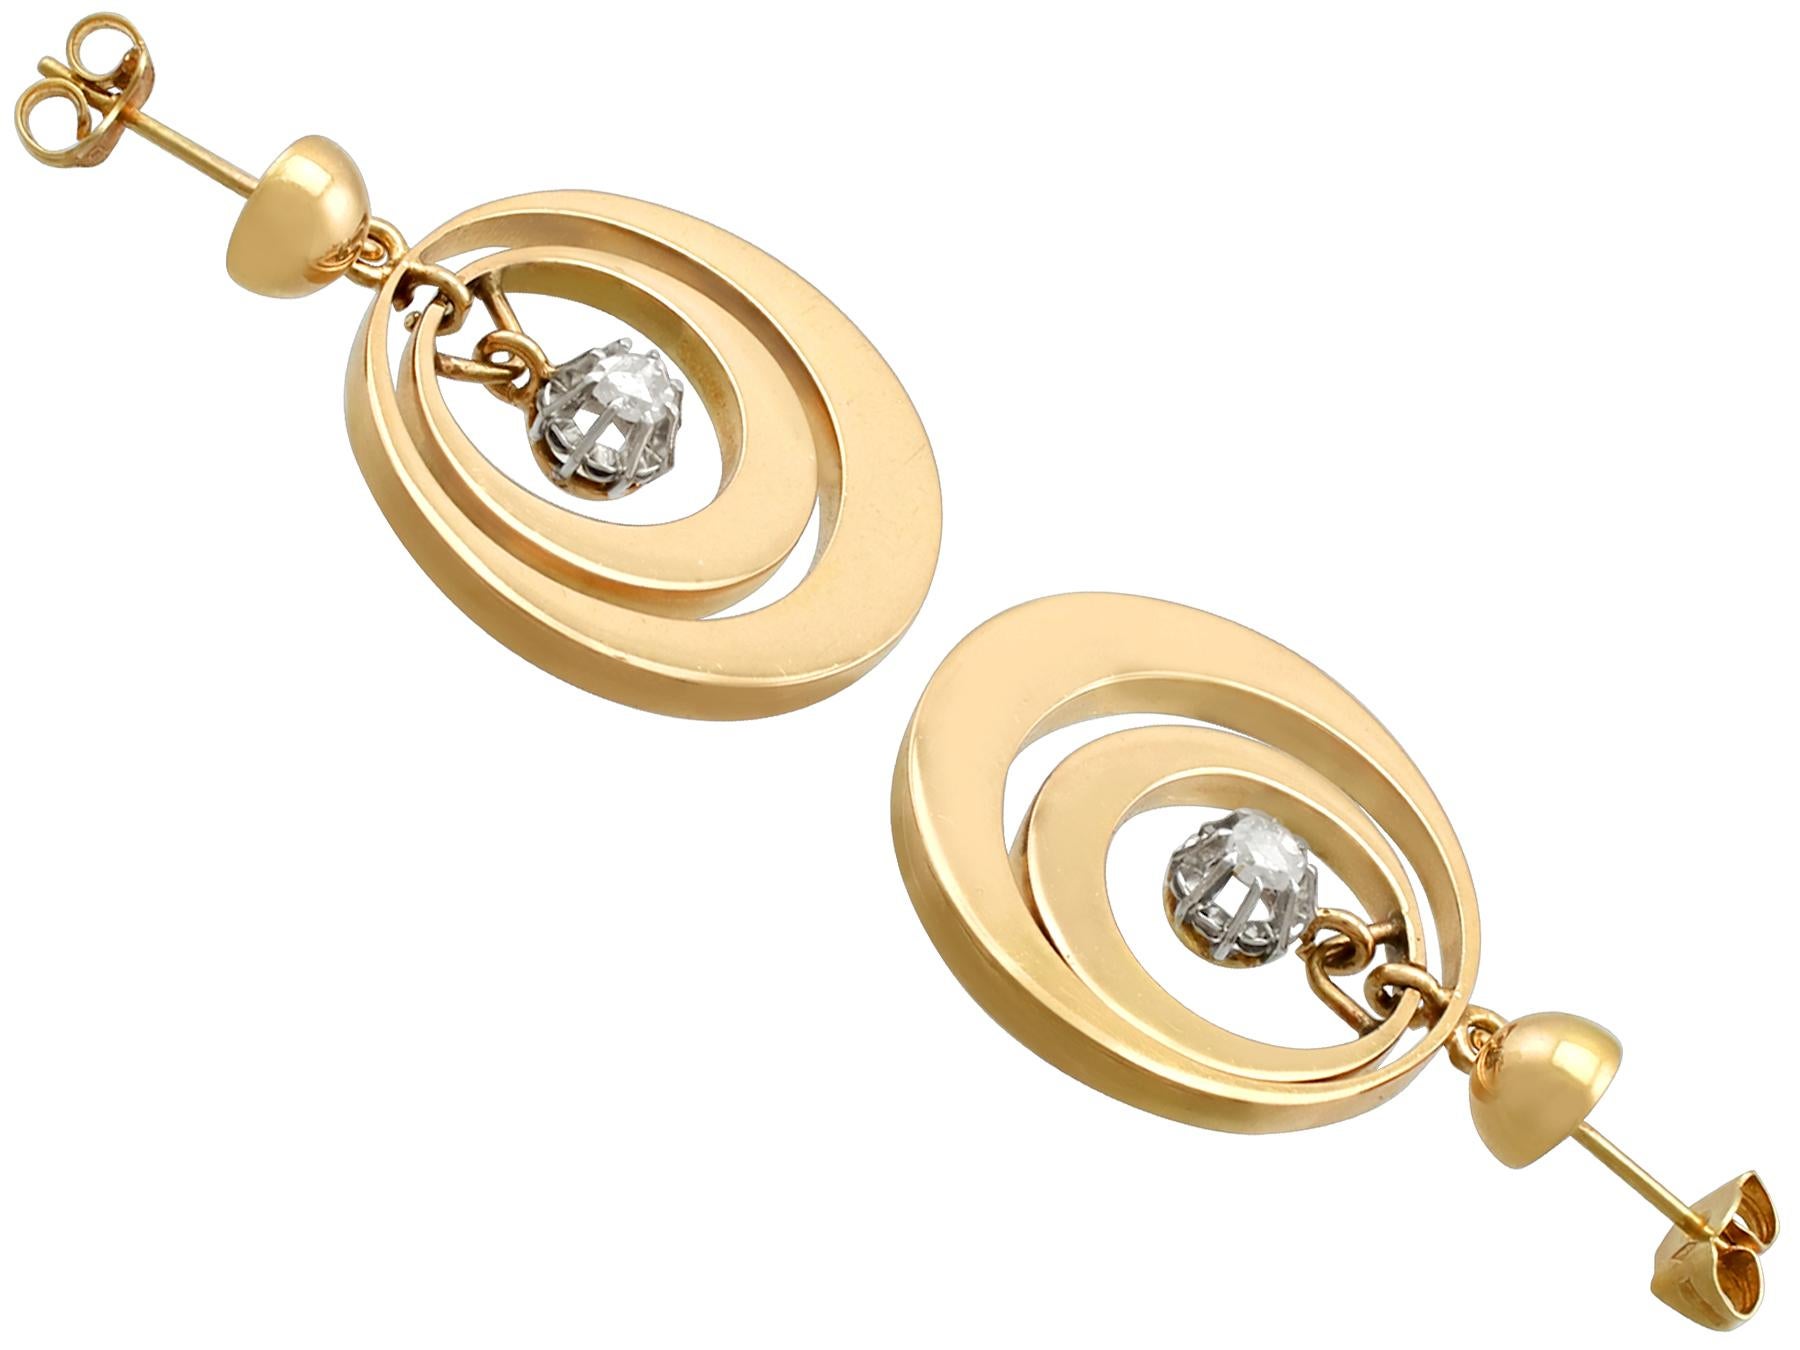 A fine and impressive pair of antique 0.30 carat diamond and 18 karat yellow gold drop earrings; part of our antique jewelry and estate jewelry collections.

These fine and impressive yellow gold drop earrings have been crafted in 18k gold.

Each